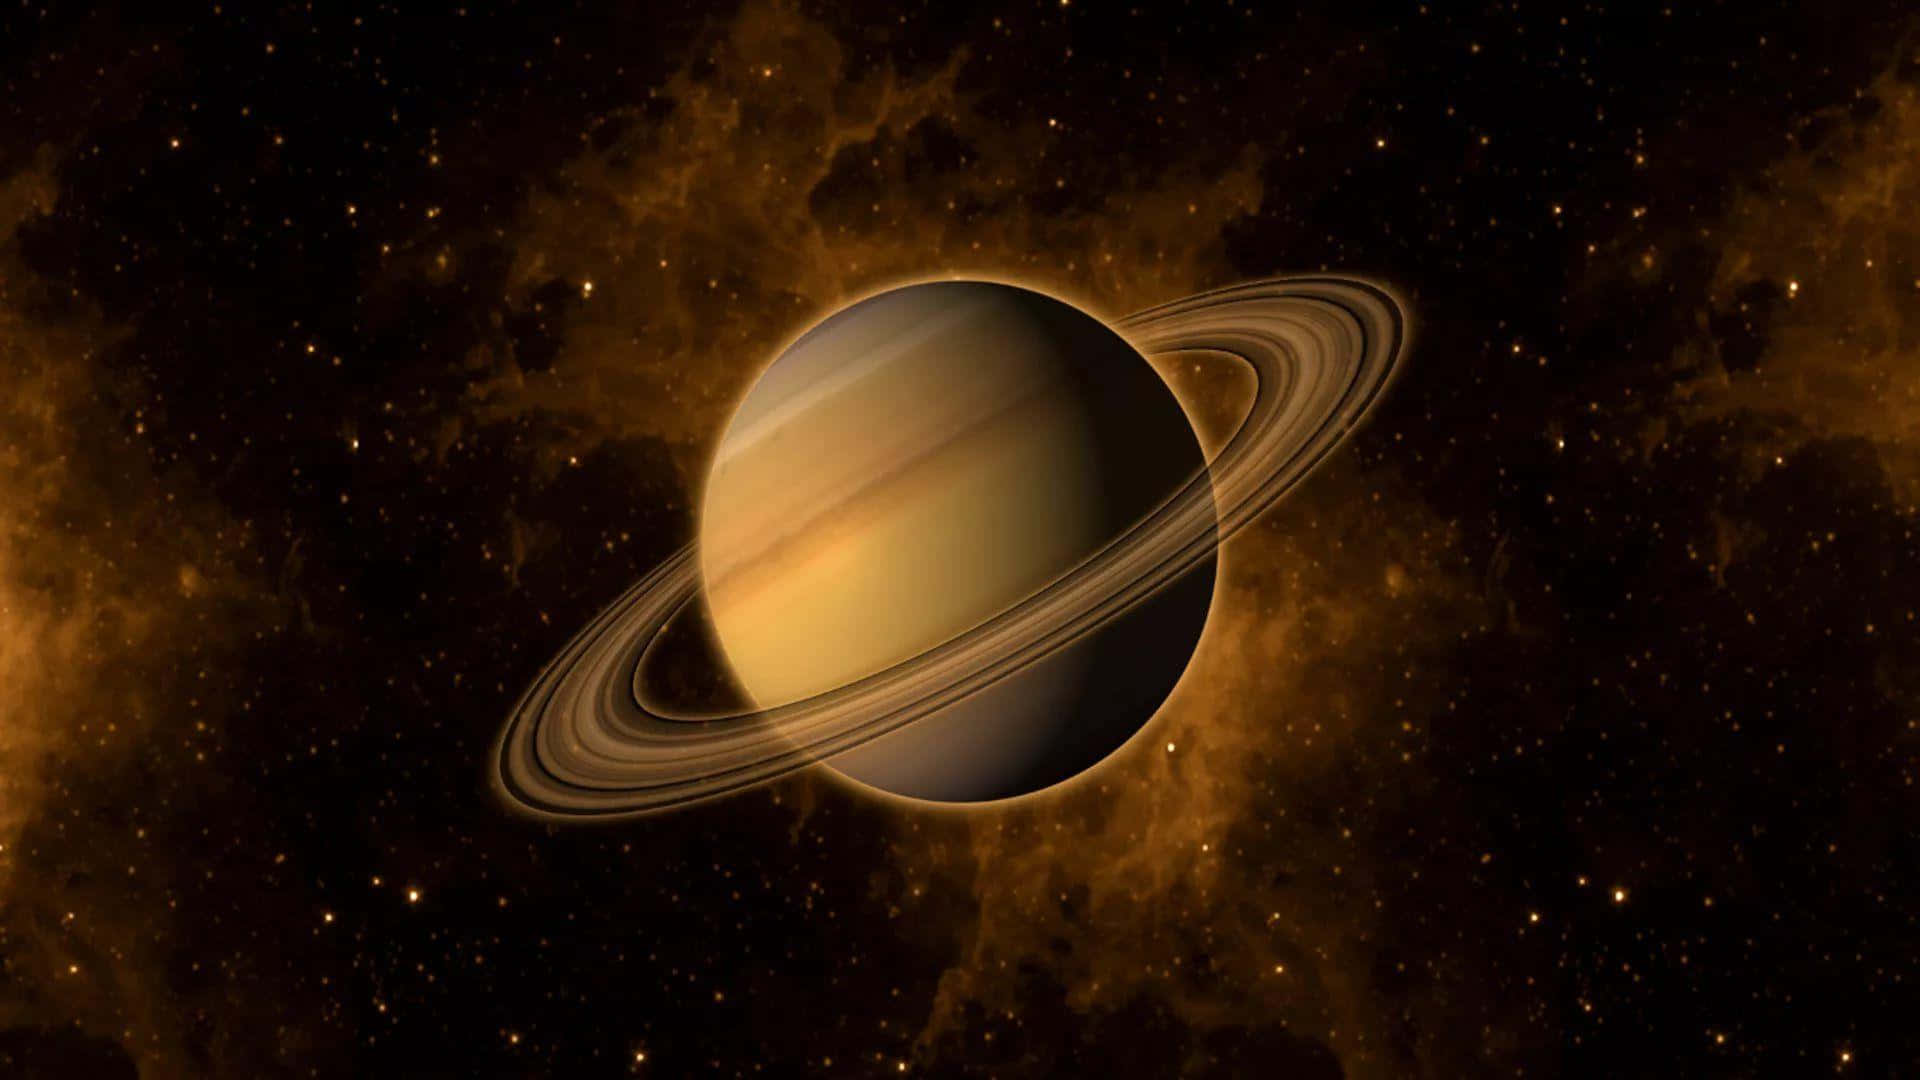 Stunning view of the planet Saturn with its glorious rings